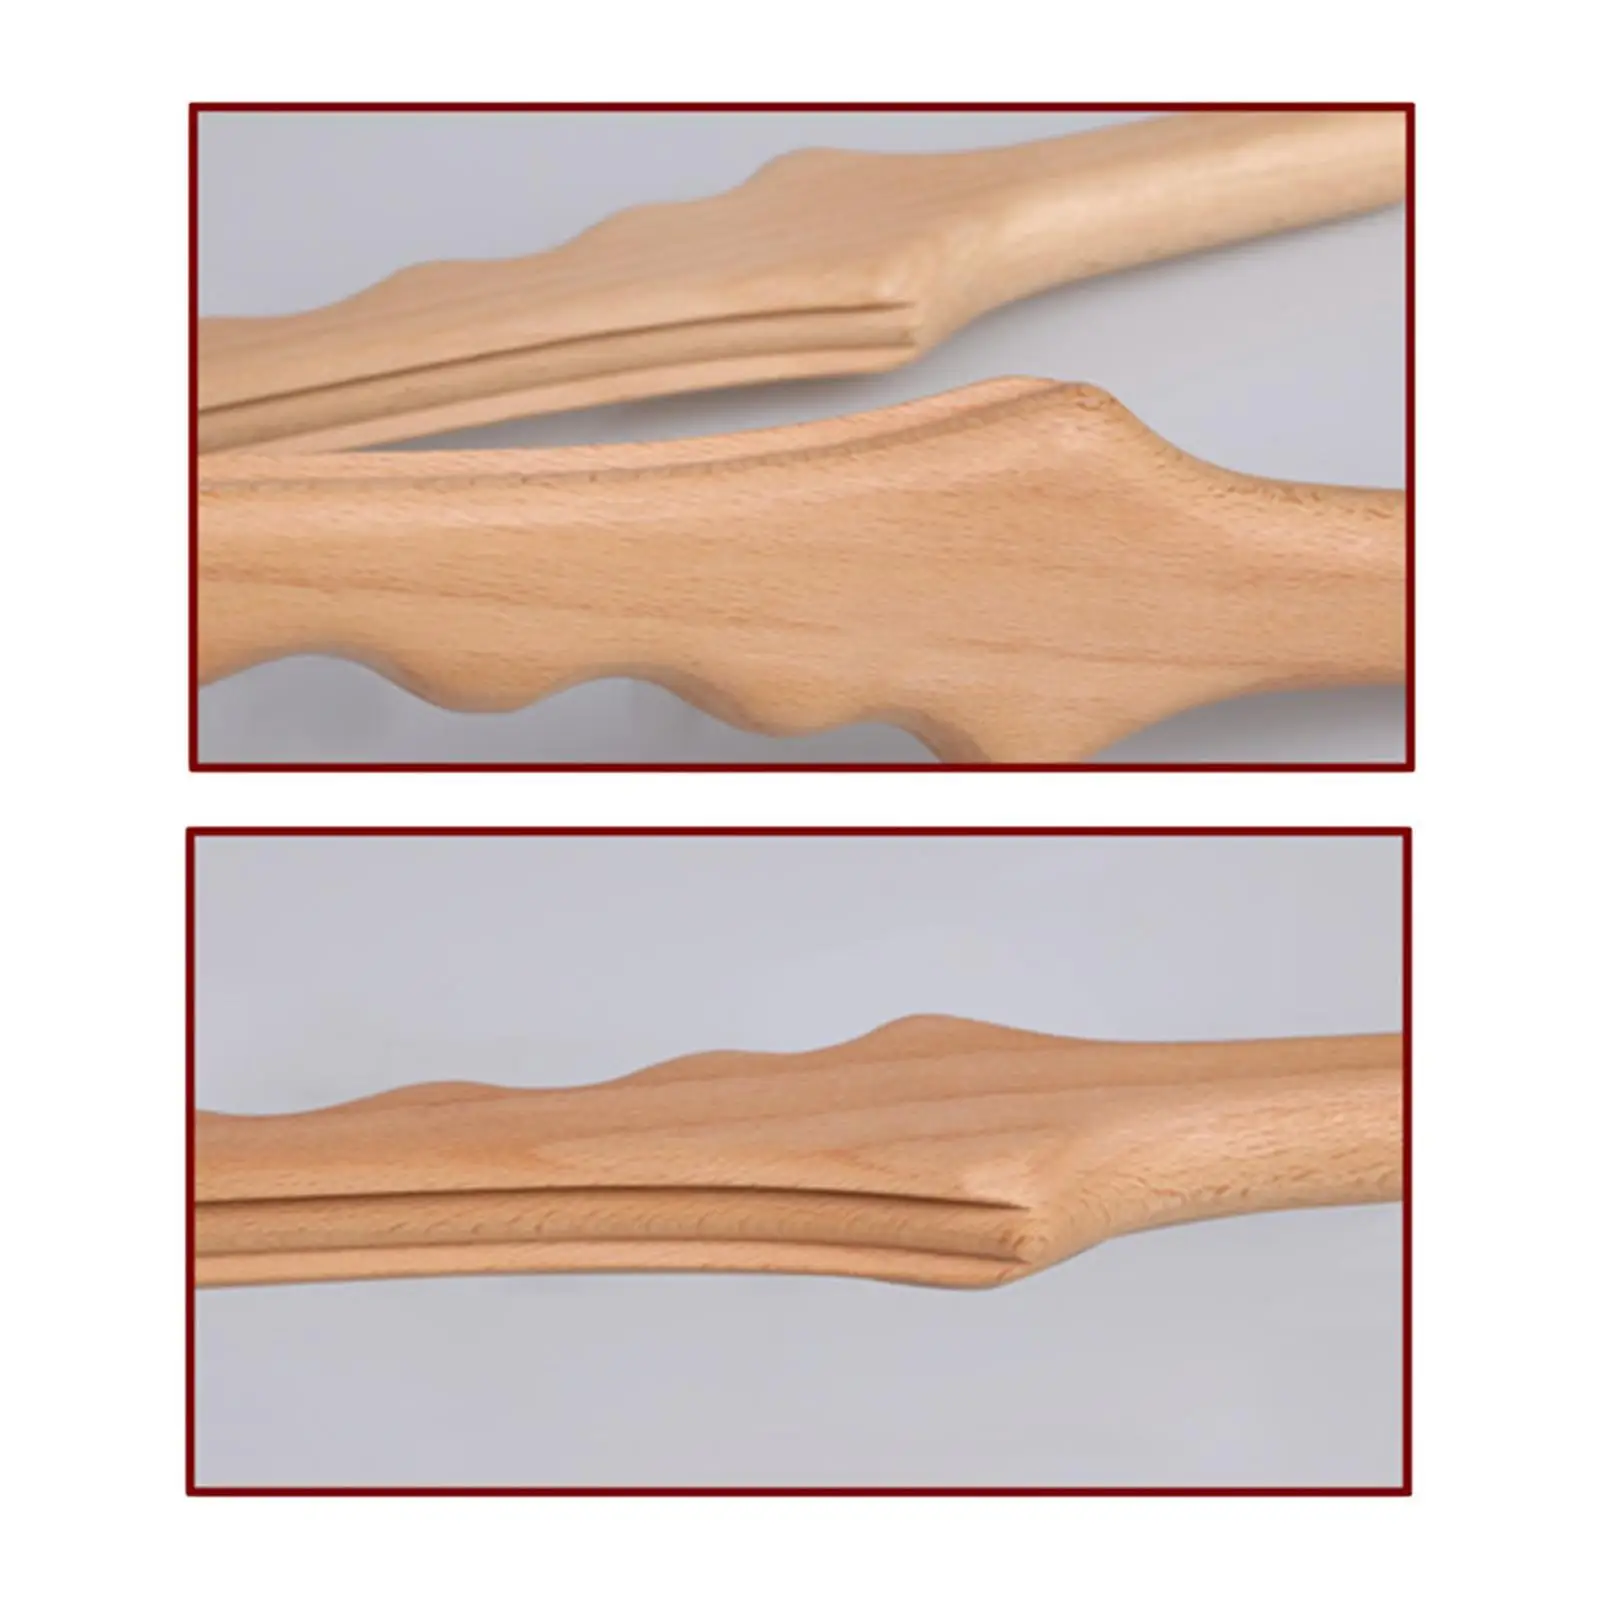 

Wooden Gua Sha Scraping Stick for Relief Muscle Soreness Anti Cellulite